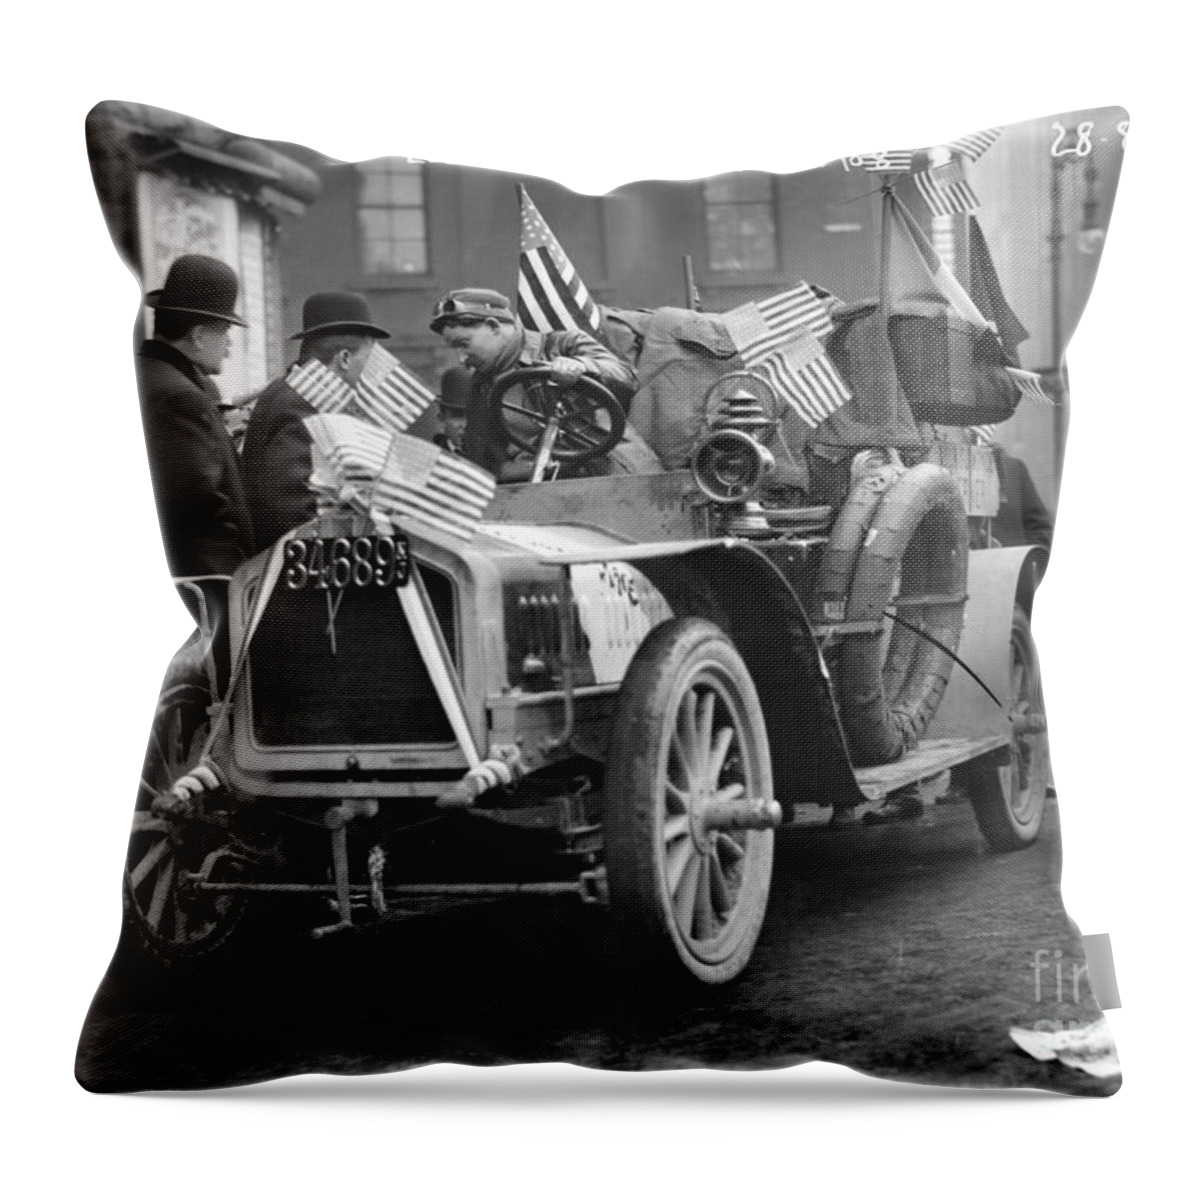 1908 Throw Pillow featuring the photograph Automobile Race, 1908 by Granger